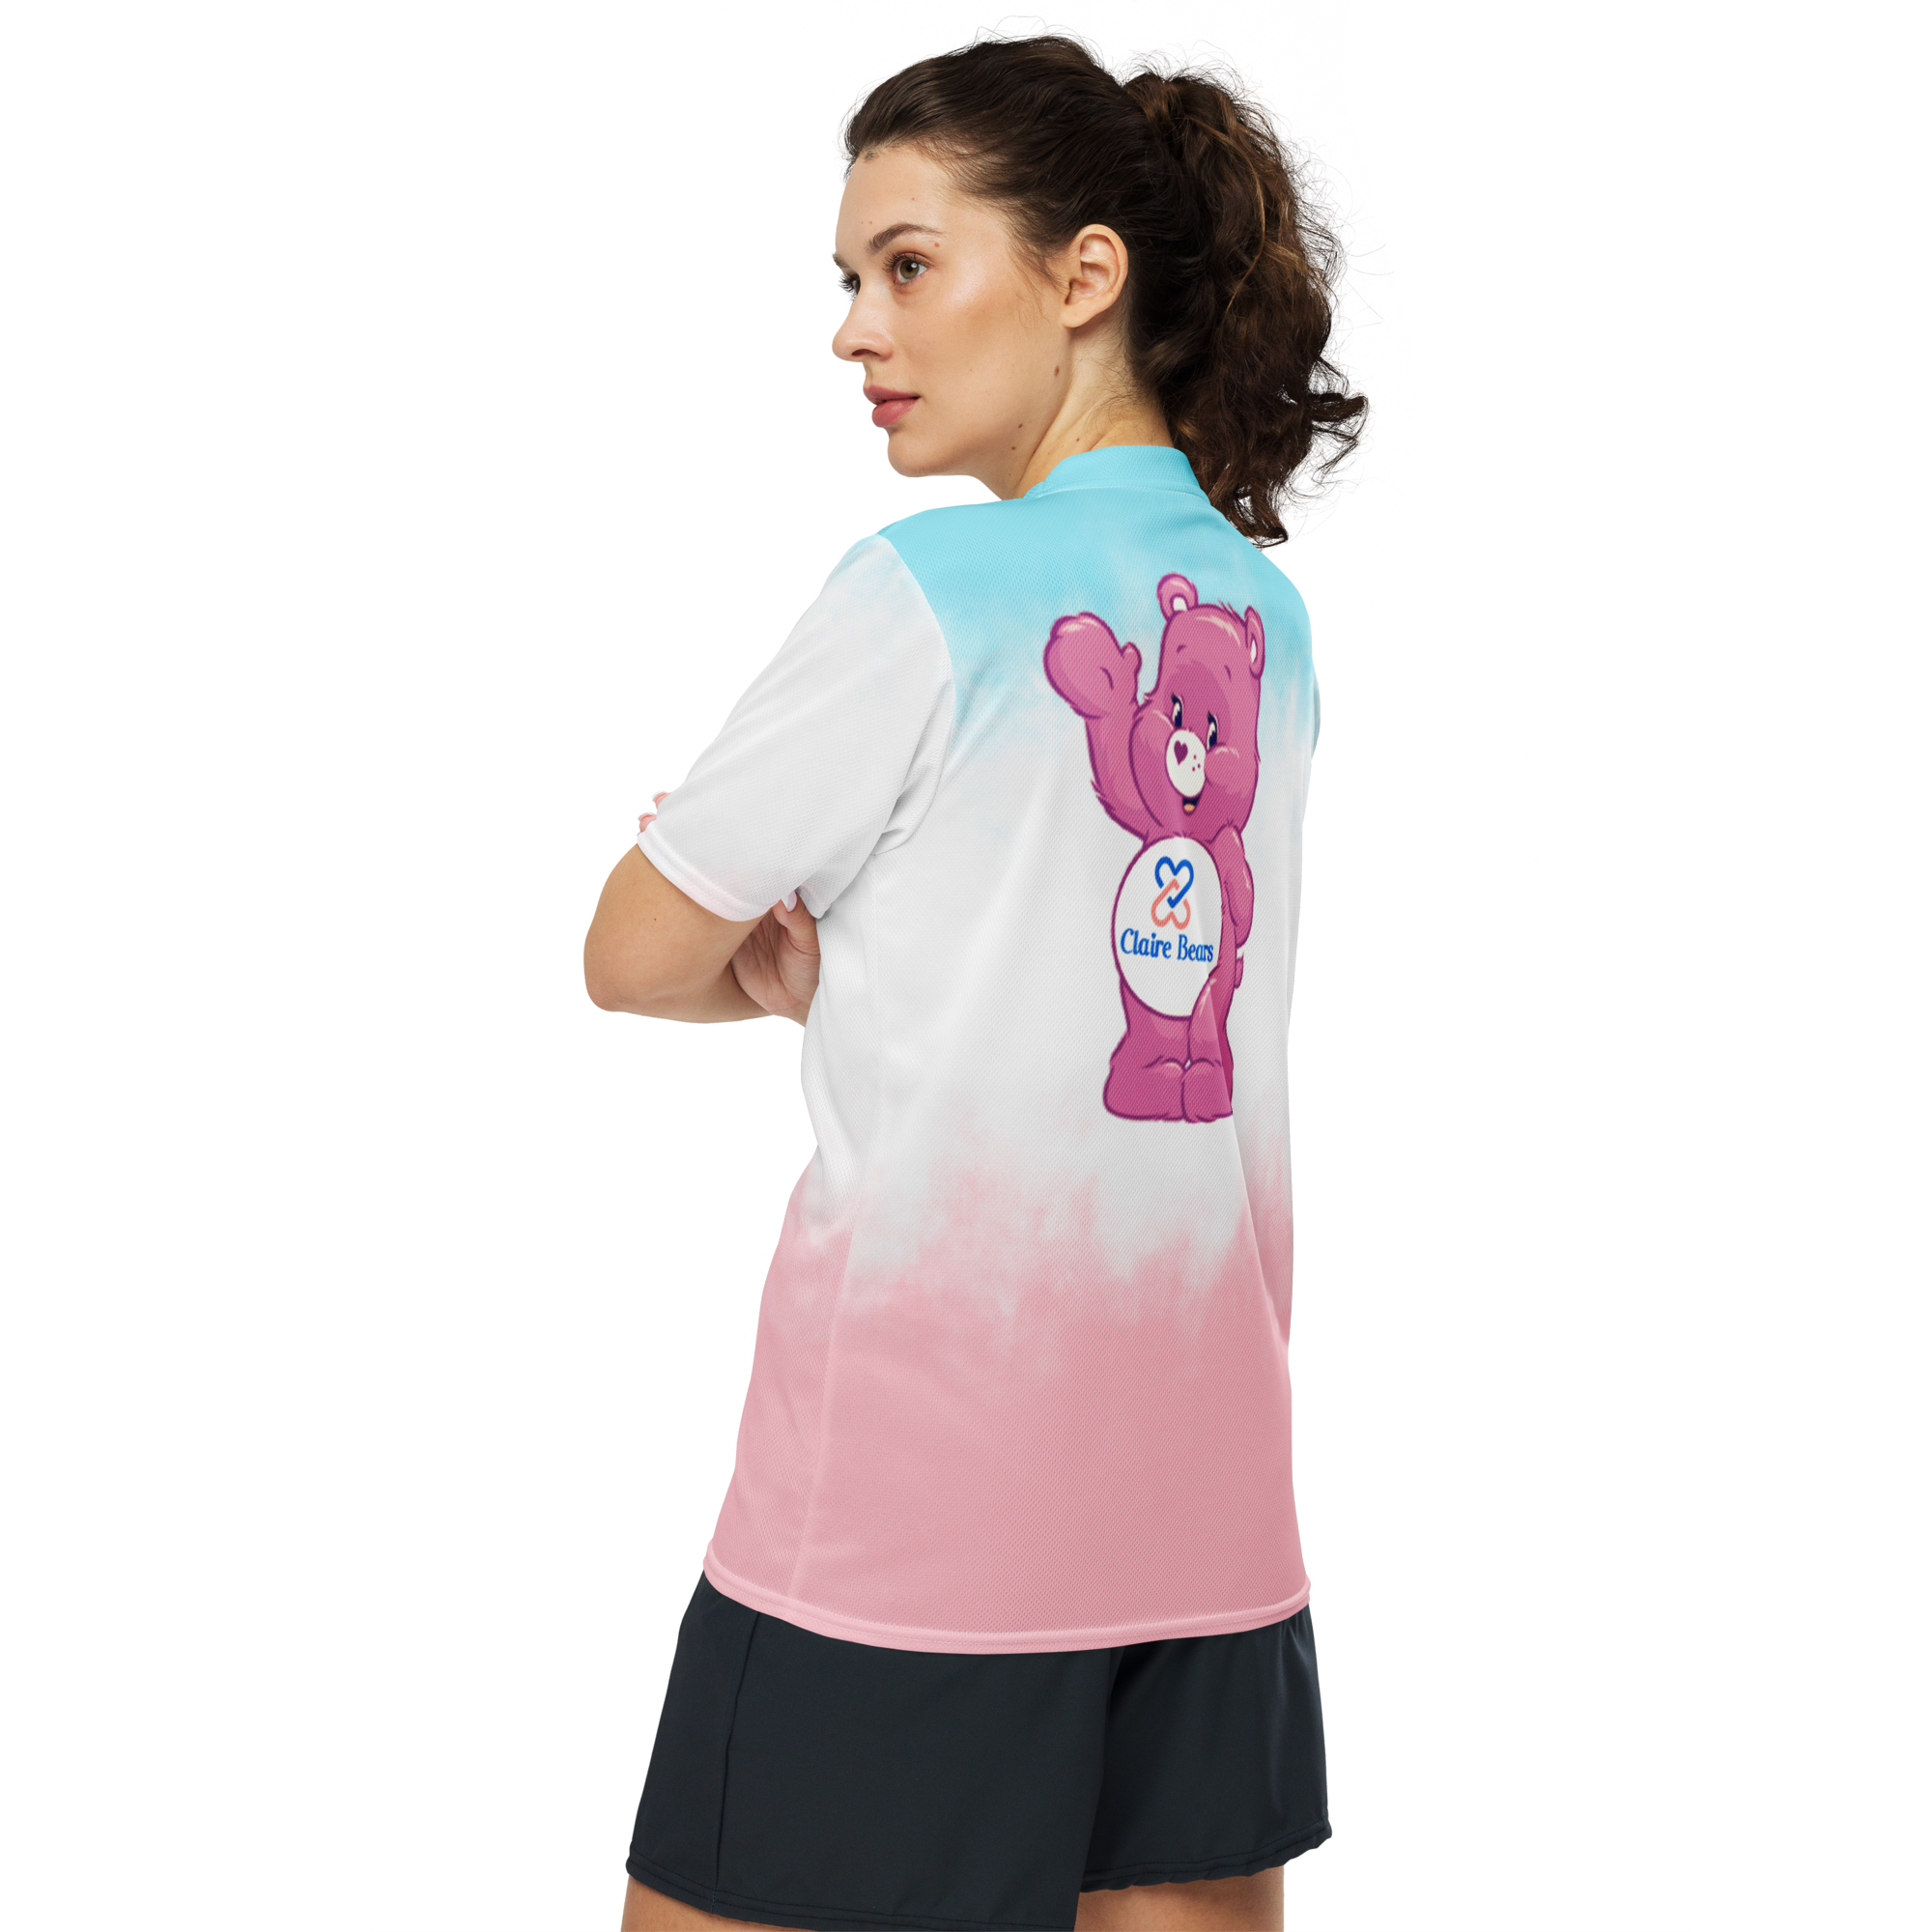 Claire Bears unisex sports jersey